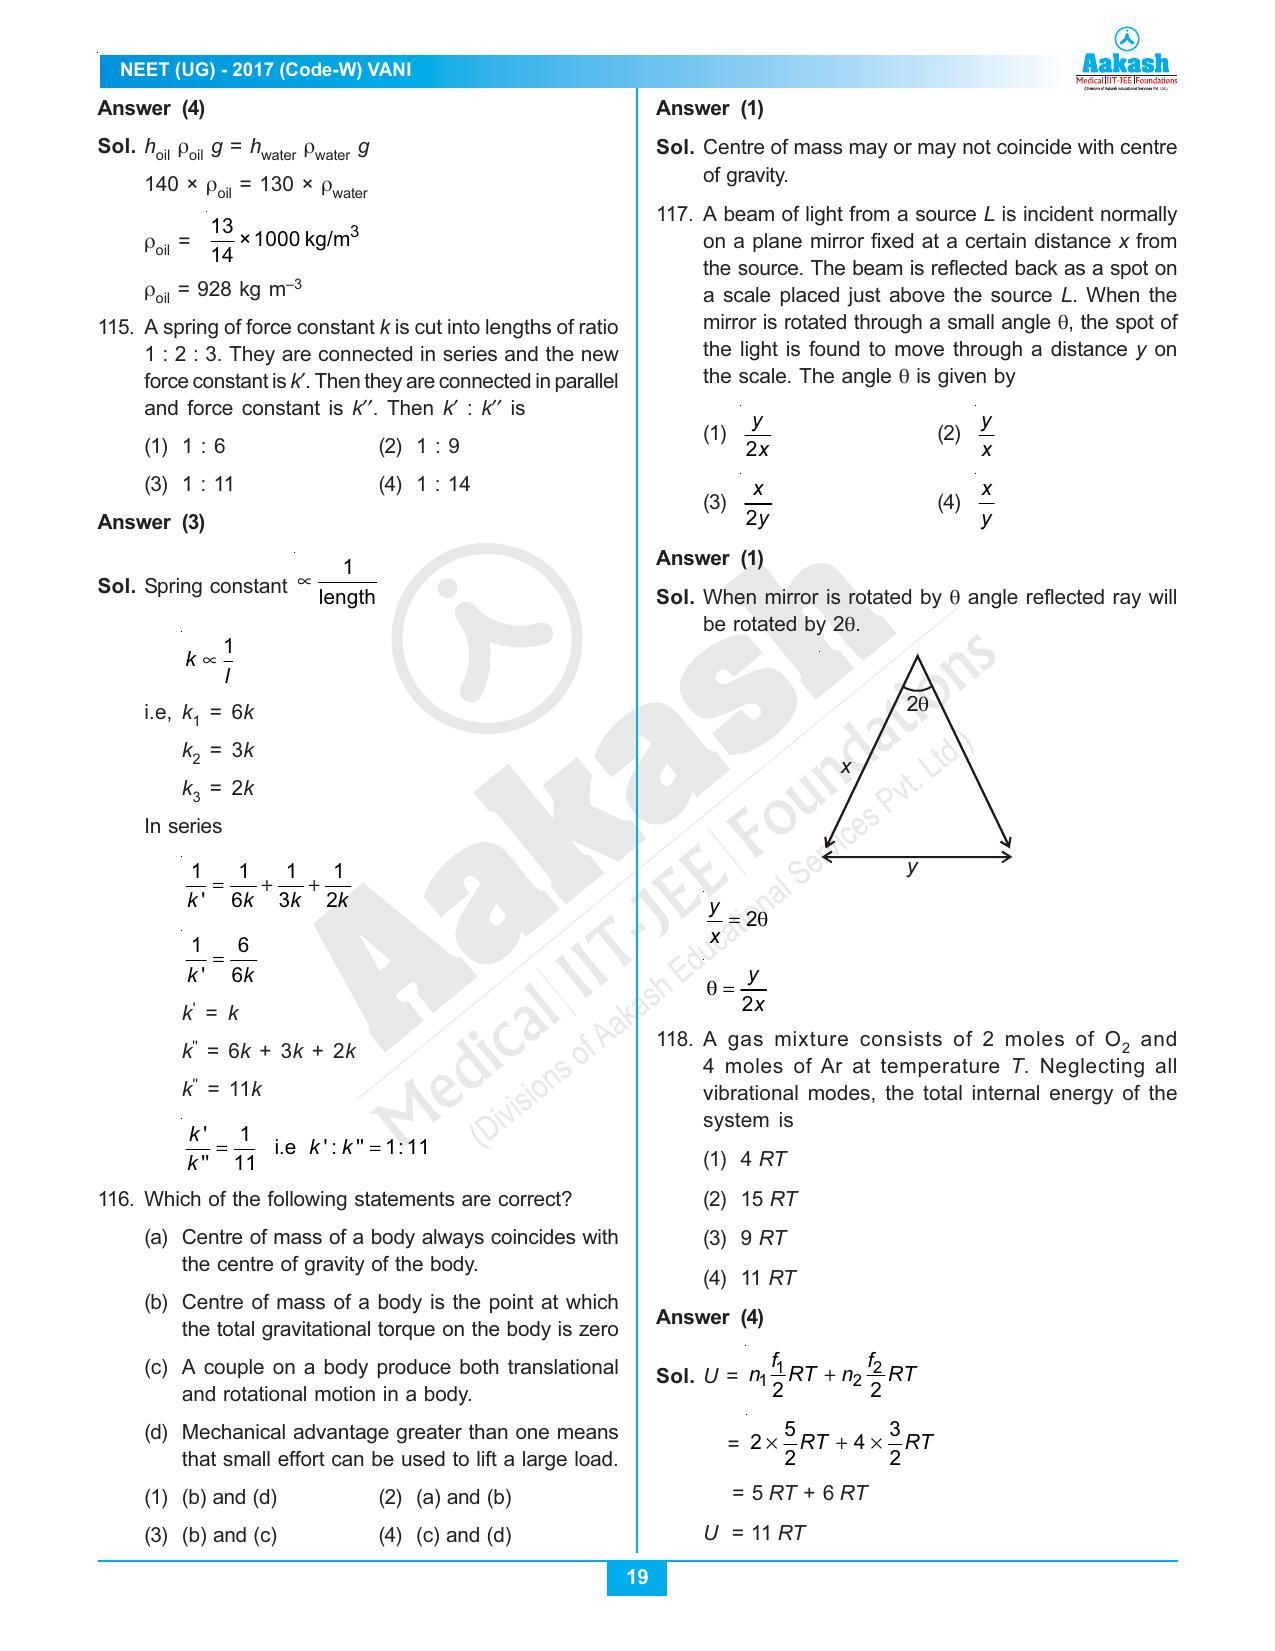  NEET Code W 2017 Answer & Solutions - Page 19